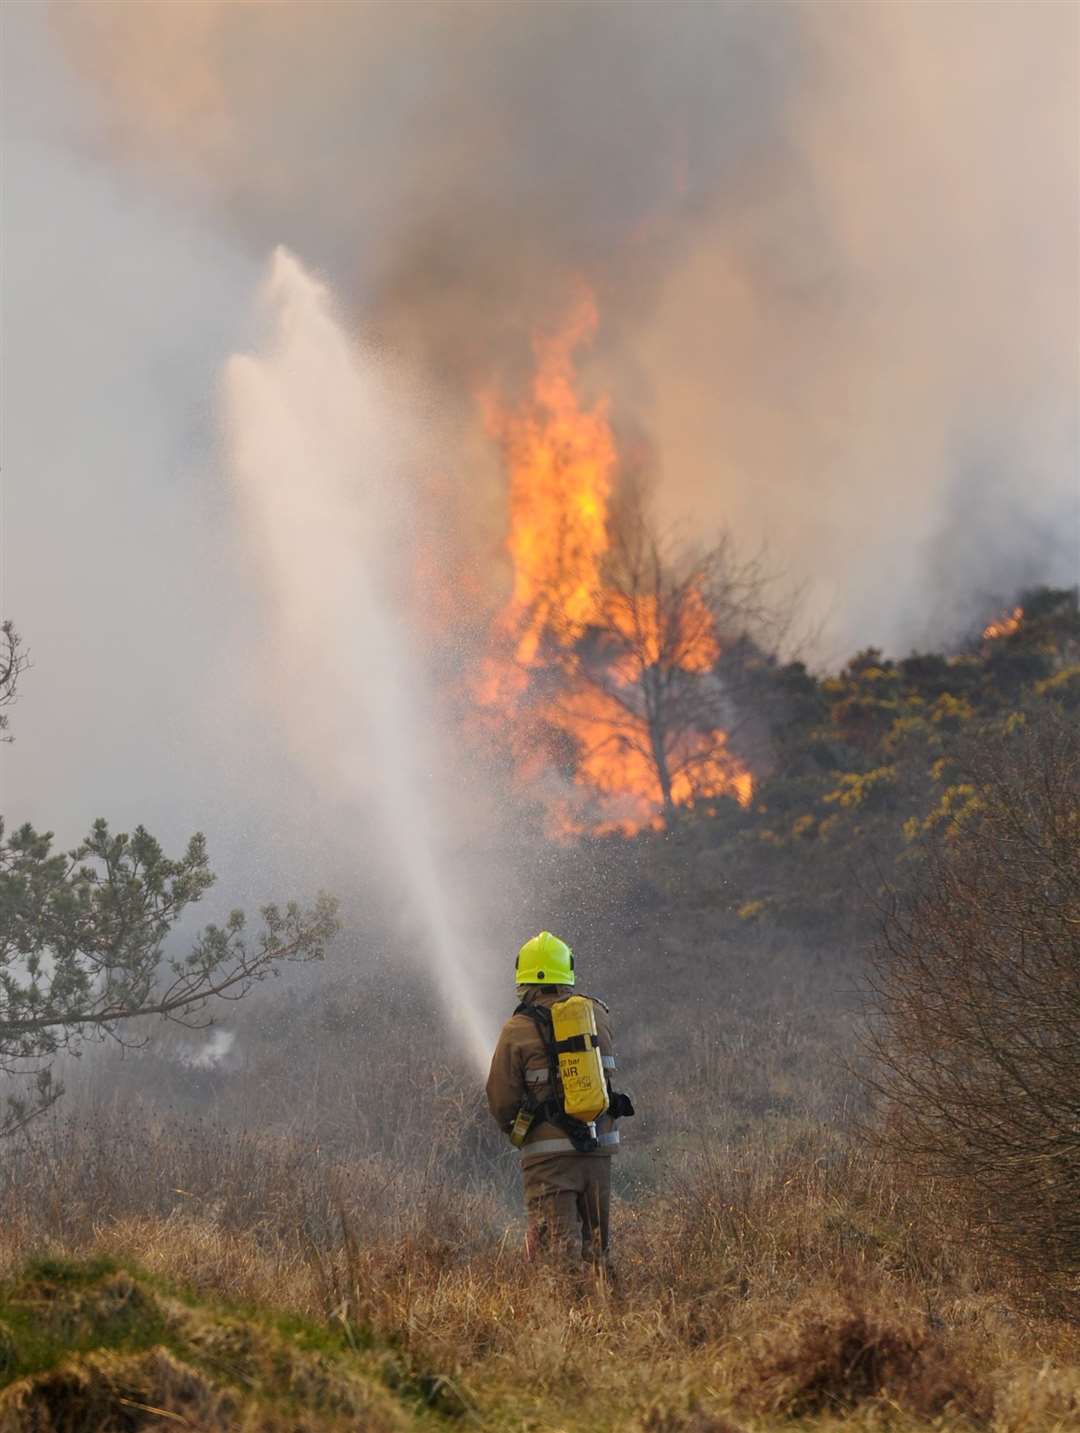 Wildfires can spread quickly and cause devastating damage. Picture: Gary Anthony.